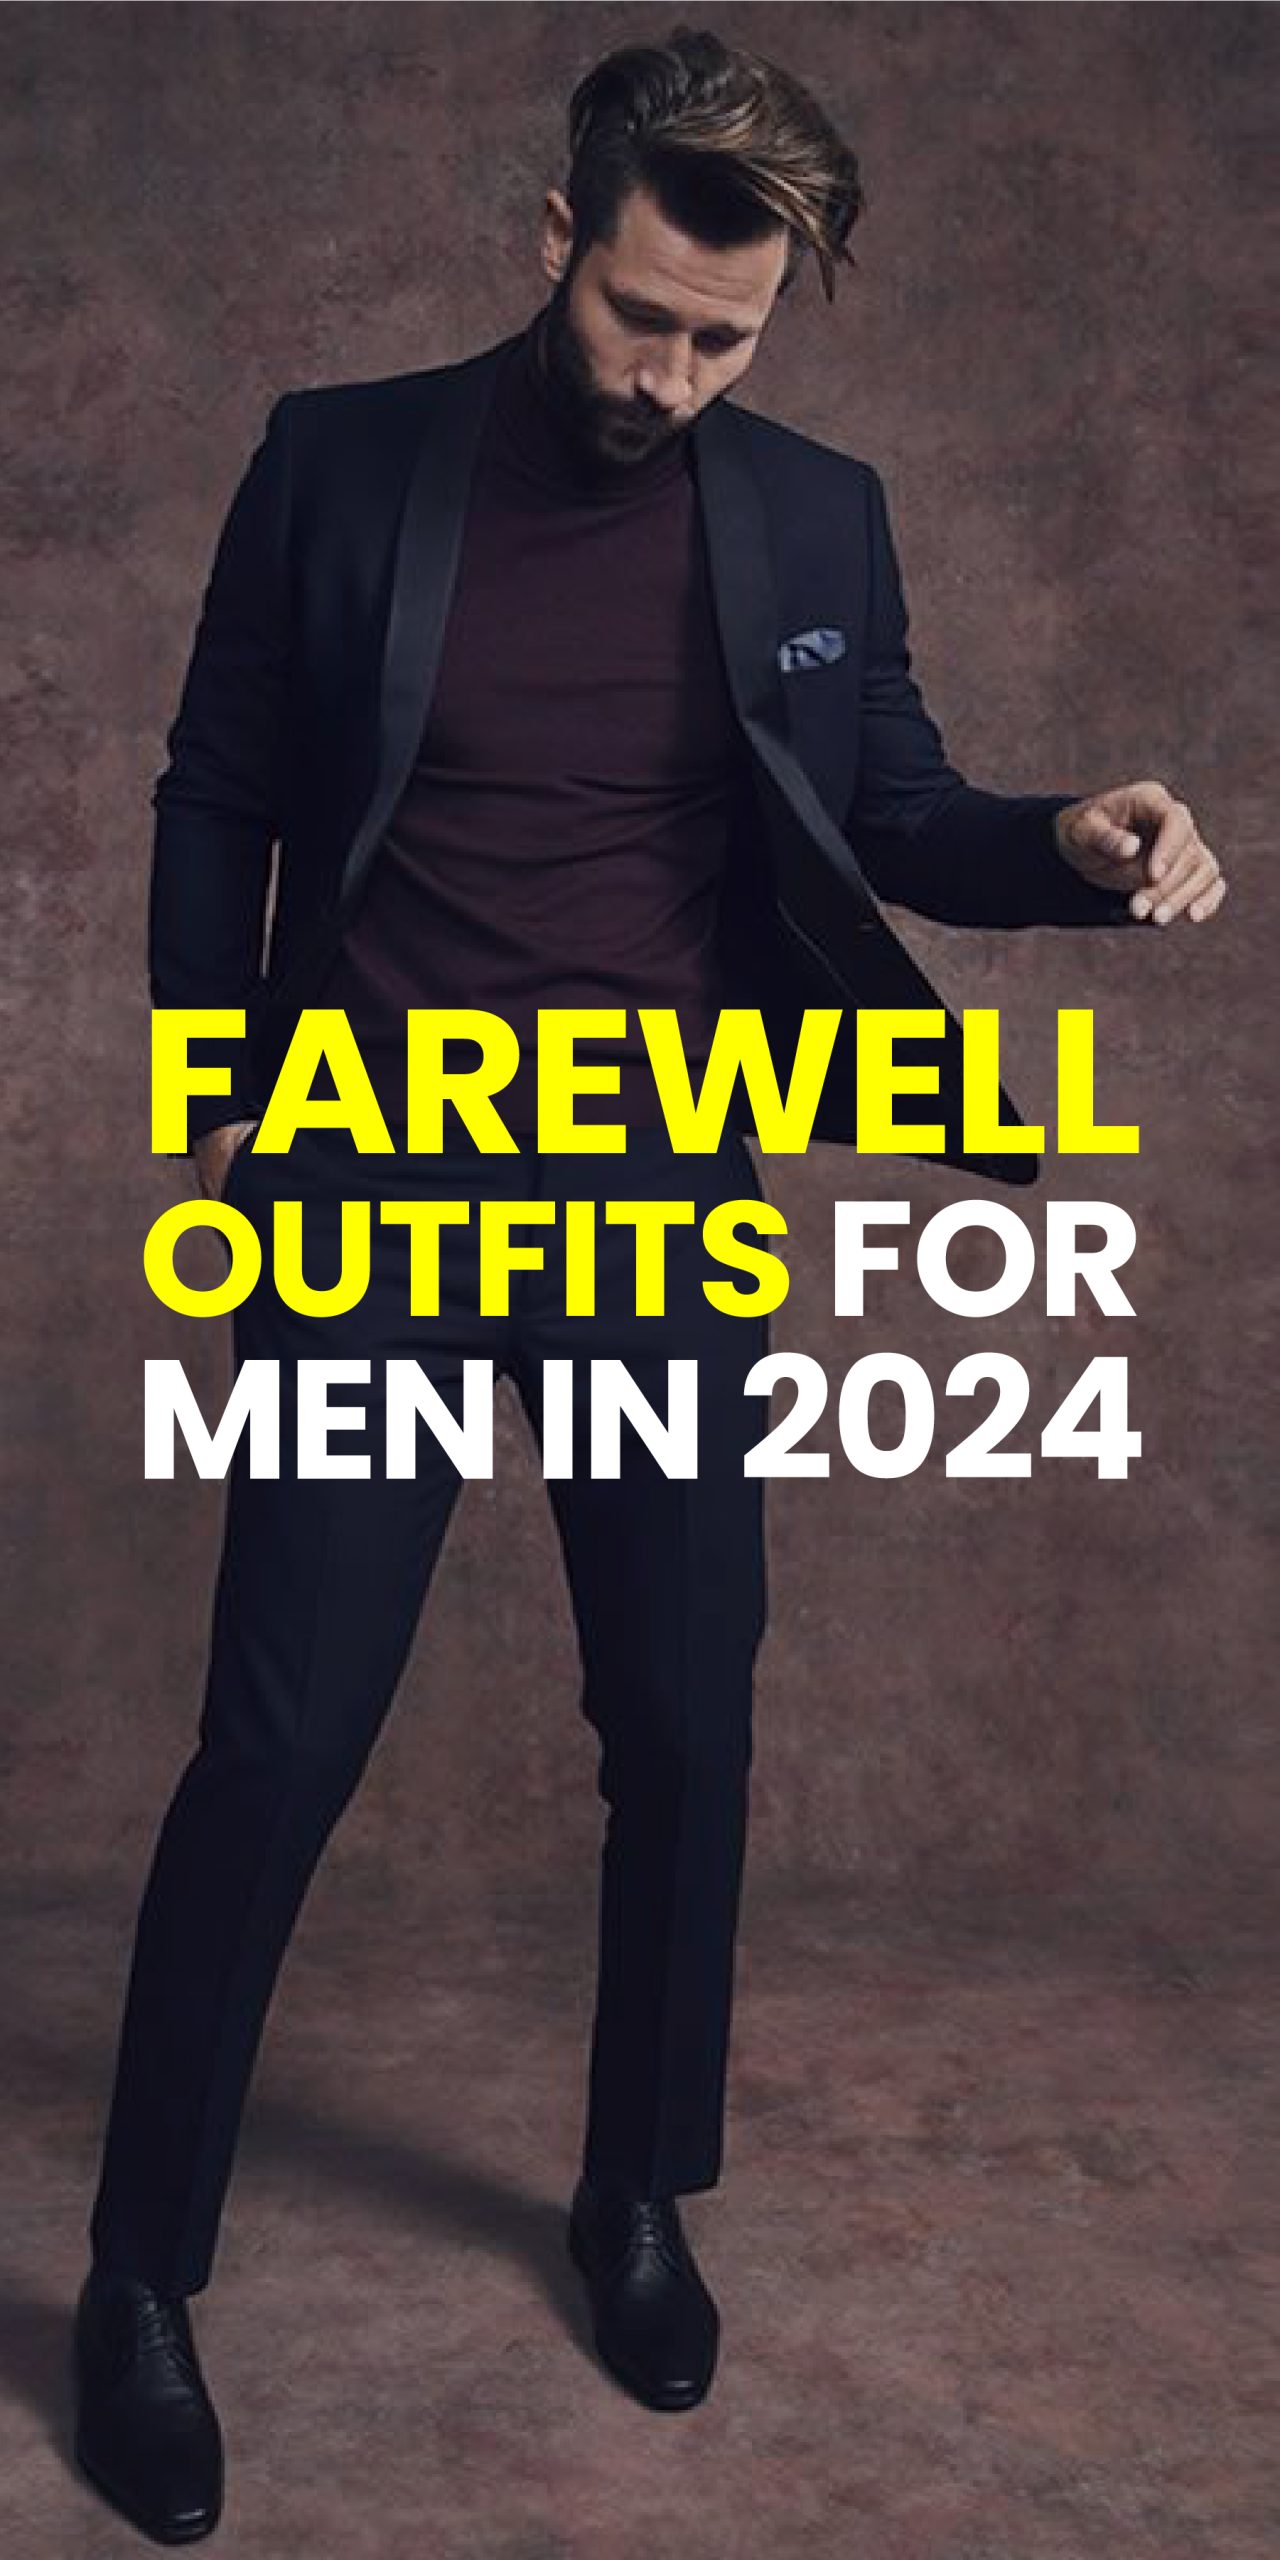 FAREWELL OUTFIT FOR MEN IN 2024